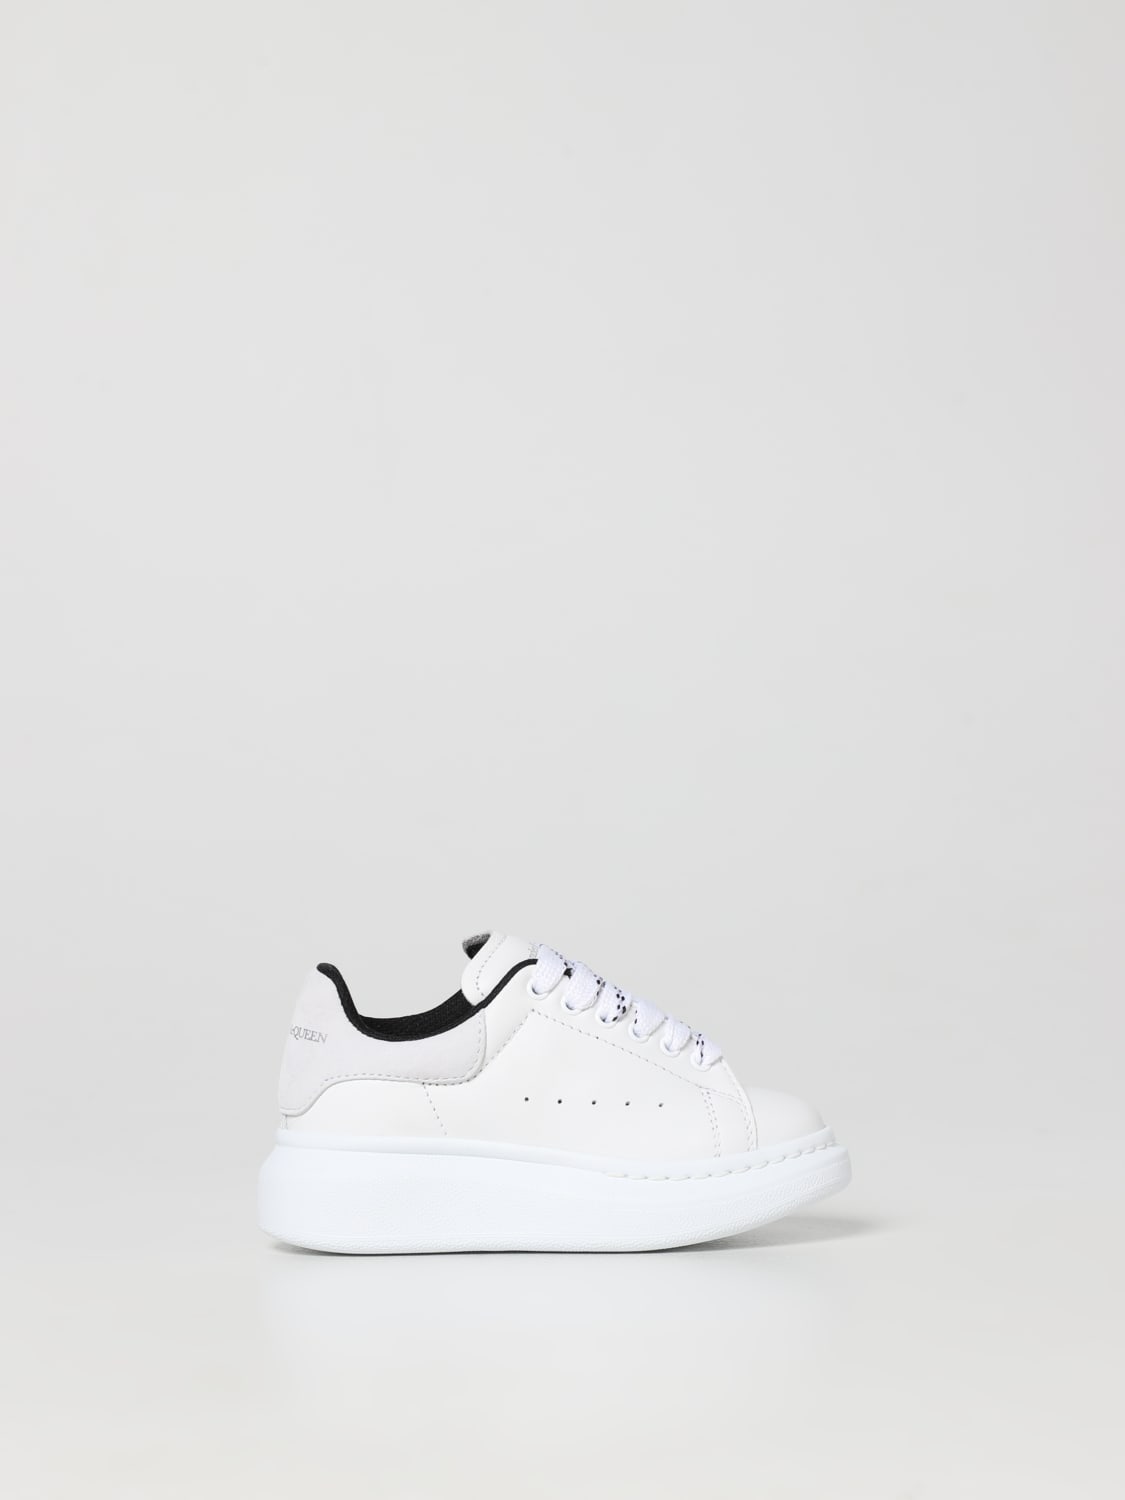 købmand hjælpemotor Muligt ALEXANDER MCQUEEN: Larry leather sneakers - White | Alexander Mcqueen shoes  710105WHX12 online on GIGLIO.COM